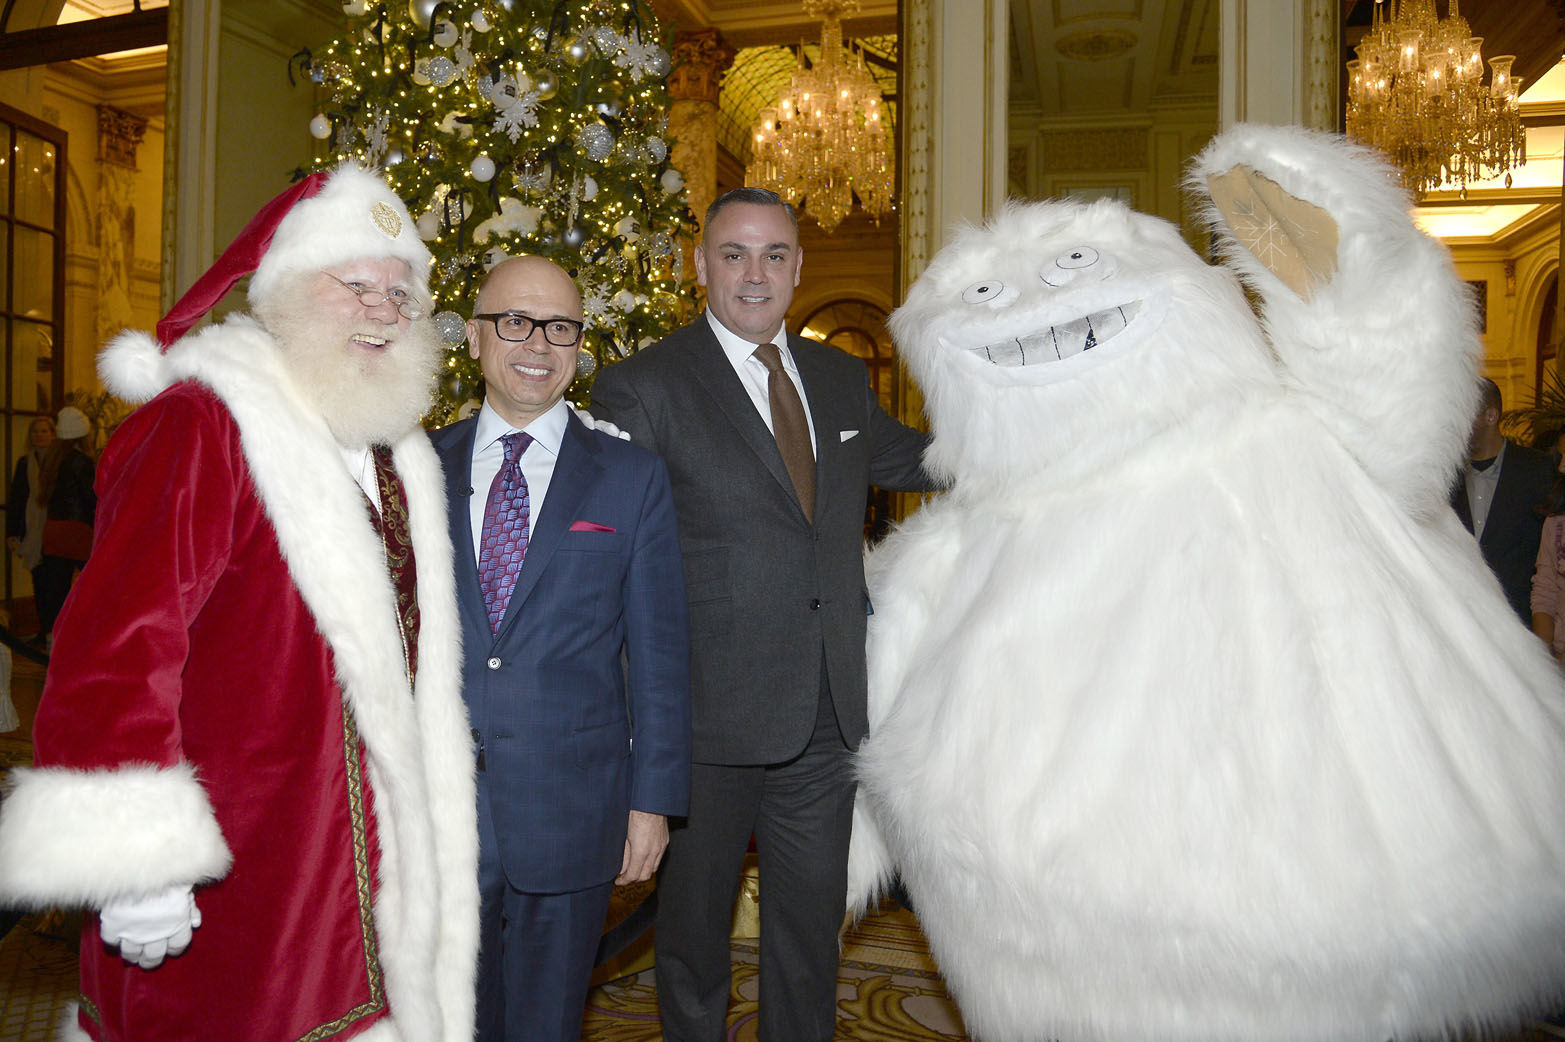 NEW YORK, NY - DECEMBER 02: Santa Claus, George Cozonis, John Cruz and Saks Yeti attend The Plaza 3rd Annual Holiday Tree Lighting at The Plaza Hotel on December 2, 2013 in New York City.  (Photo by Fernanda Calfat/Getty Images)